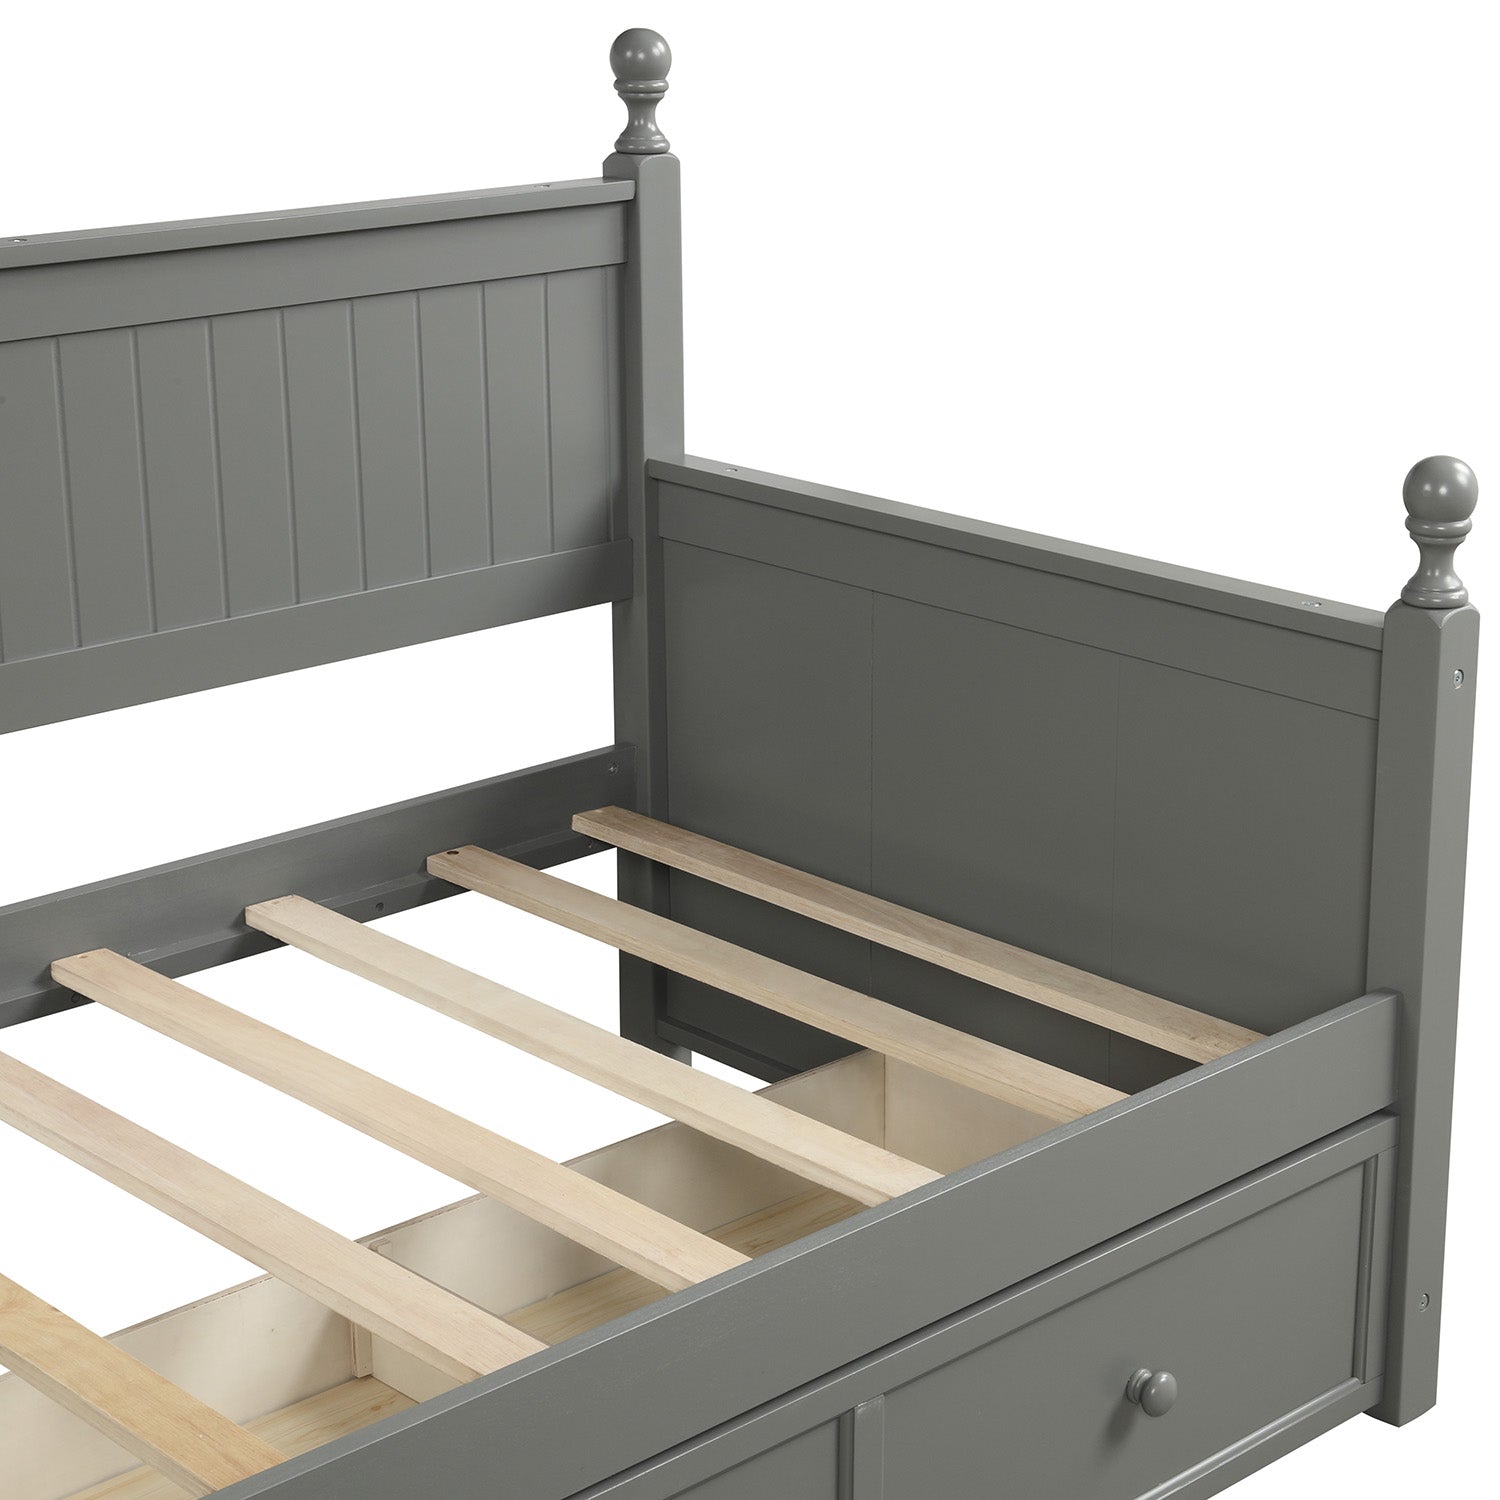 Bellemave Twin Size Daybed with Three Drawers - Bellemave